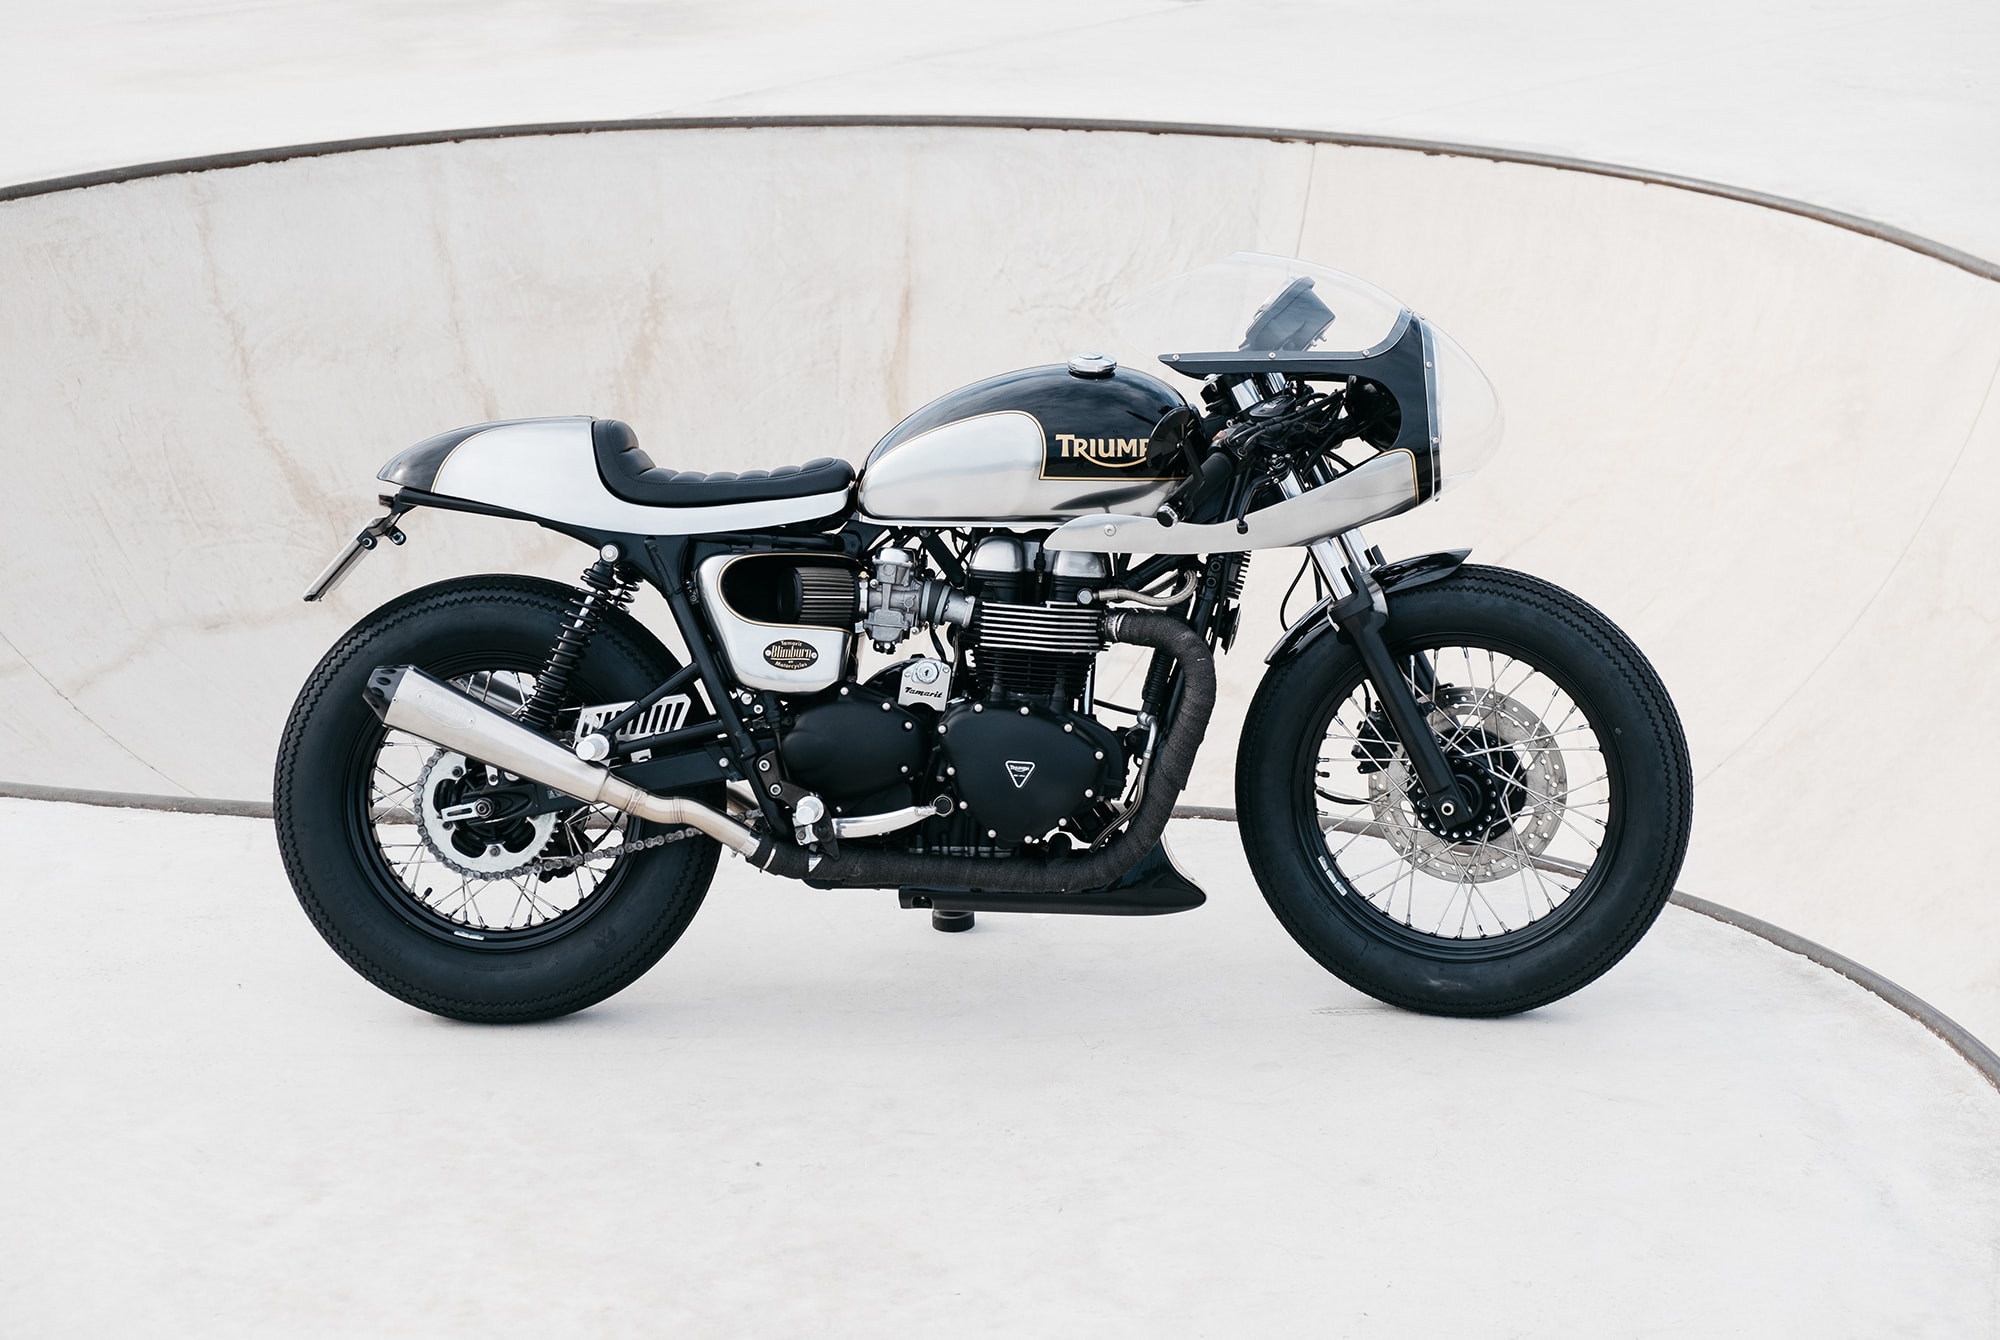 Triumph Cafe Racer by Tamarit Motorcycles